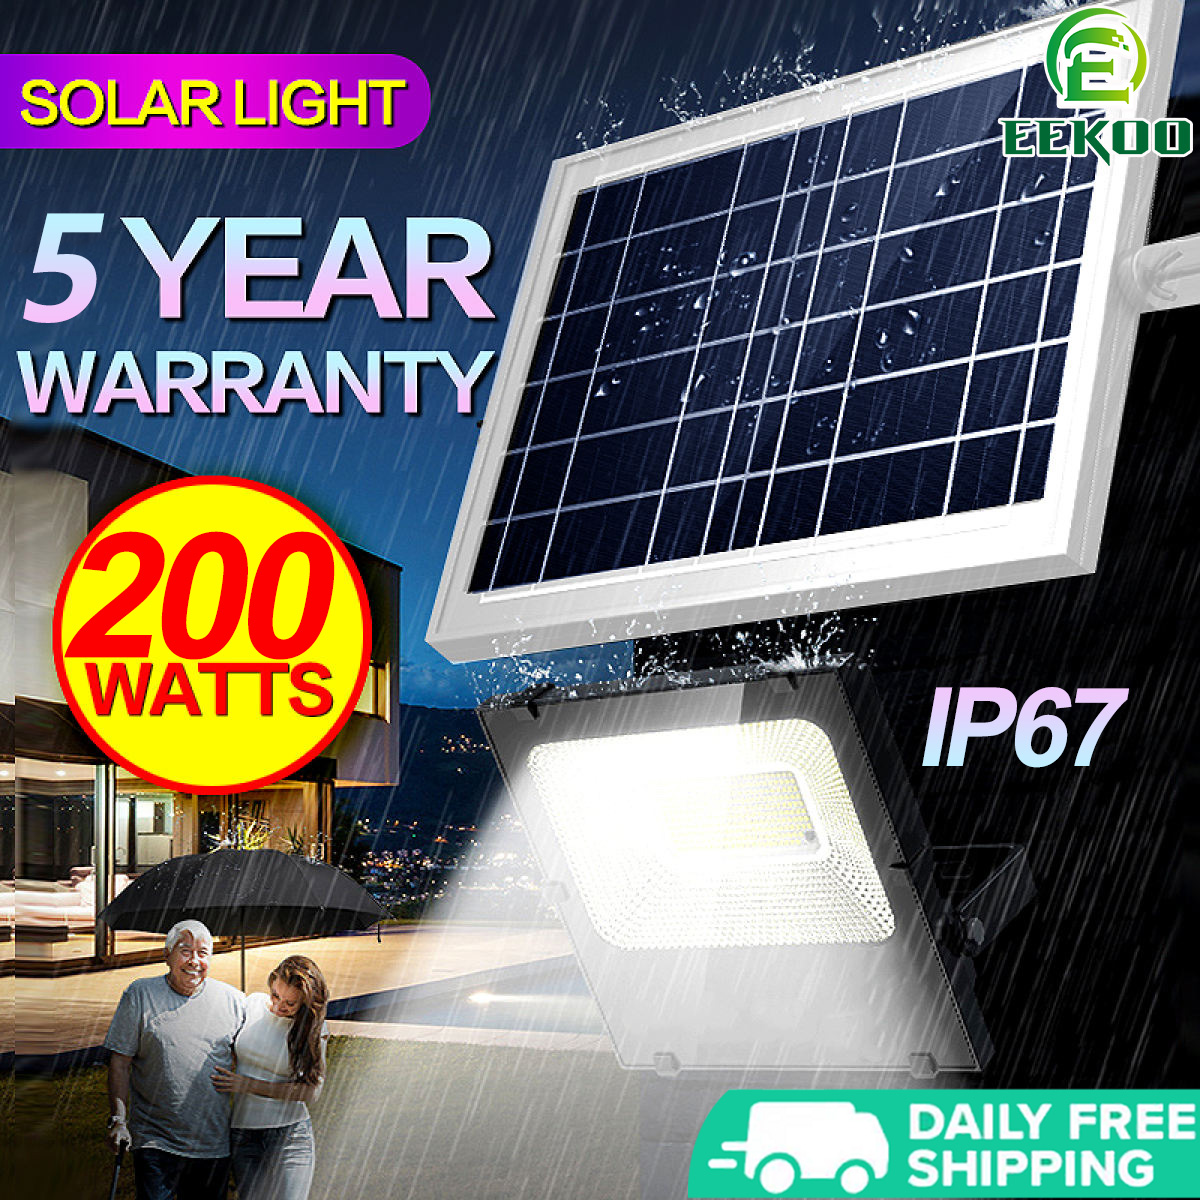 Outdoor Lighting For, Outdoor Solar Lights Sets Philippines